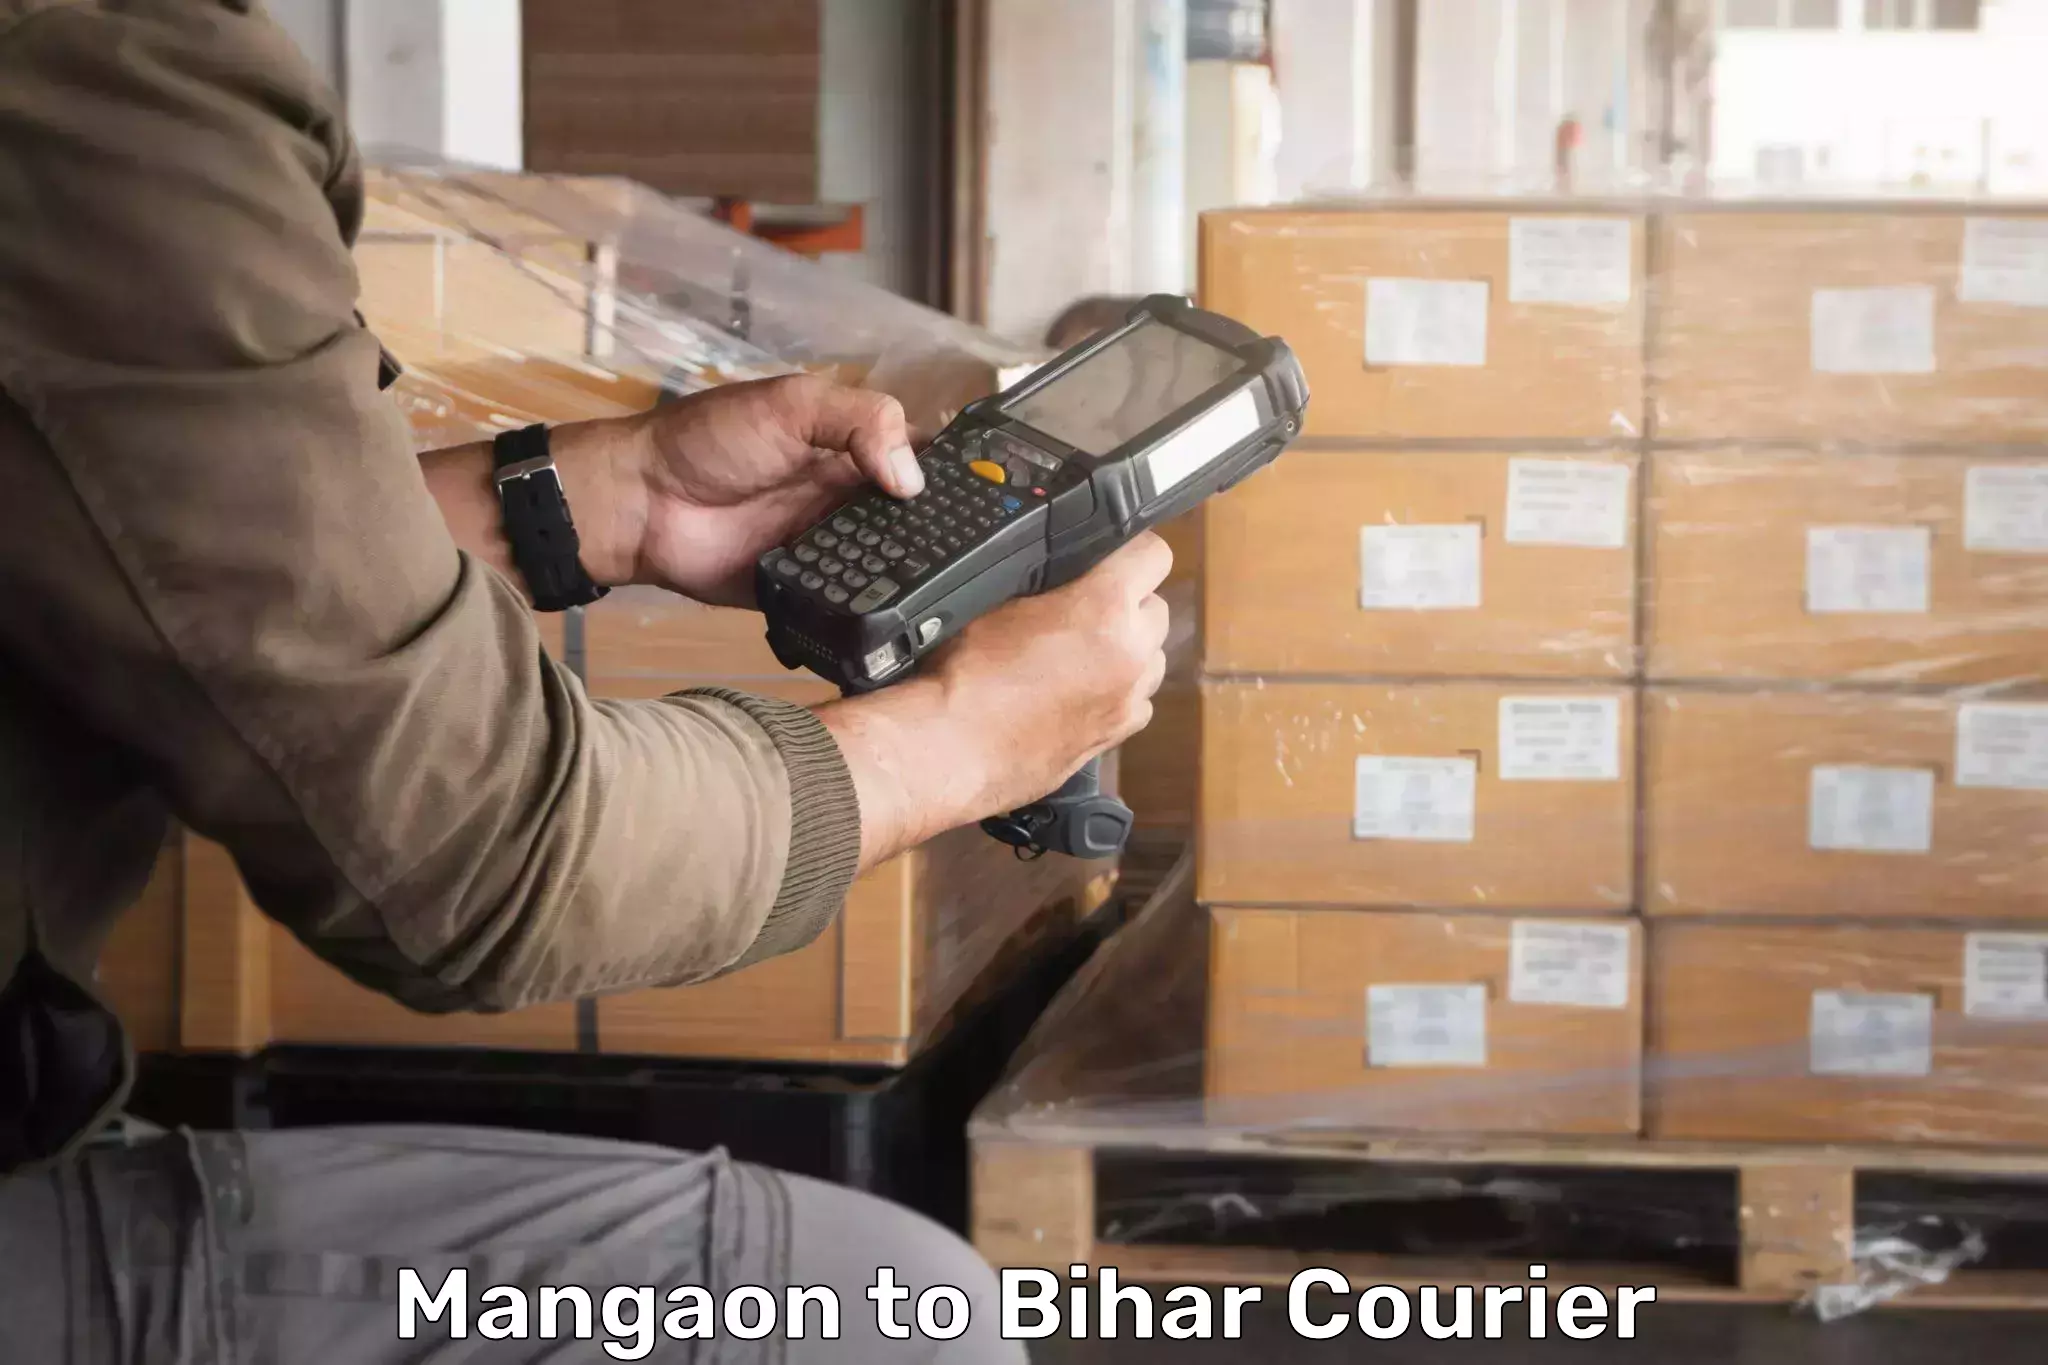 Next-day delivery options Mangaon to Bihar